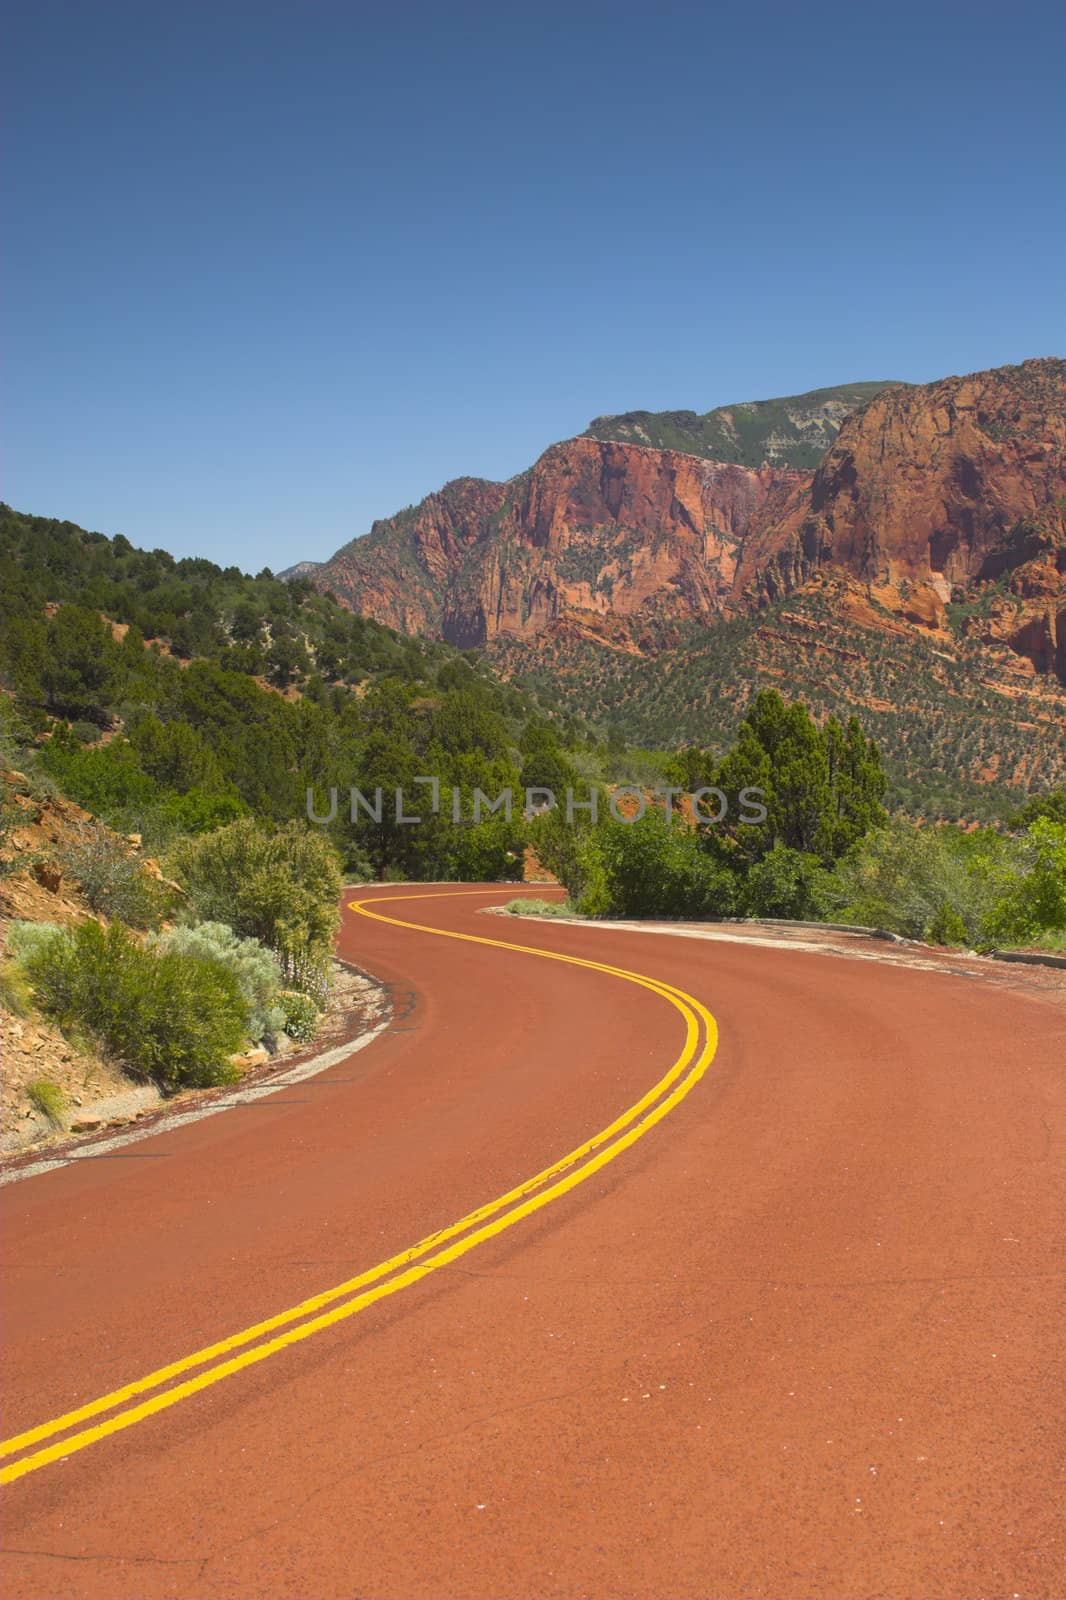 Red road to the mountains of the Zion National park